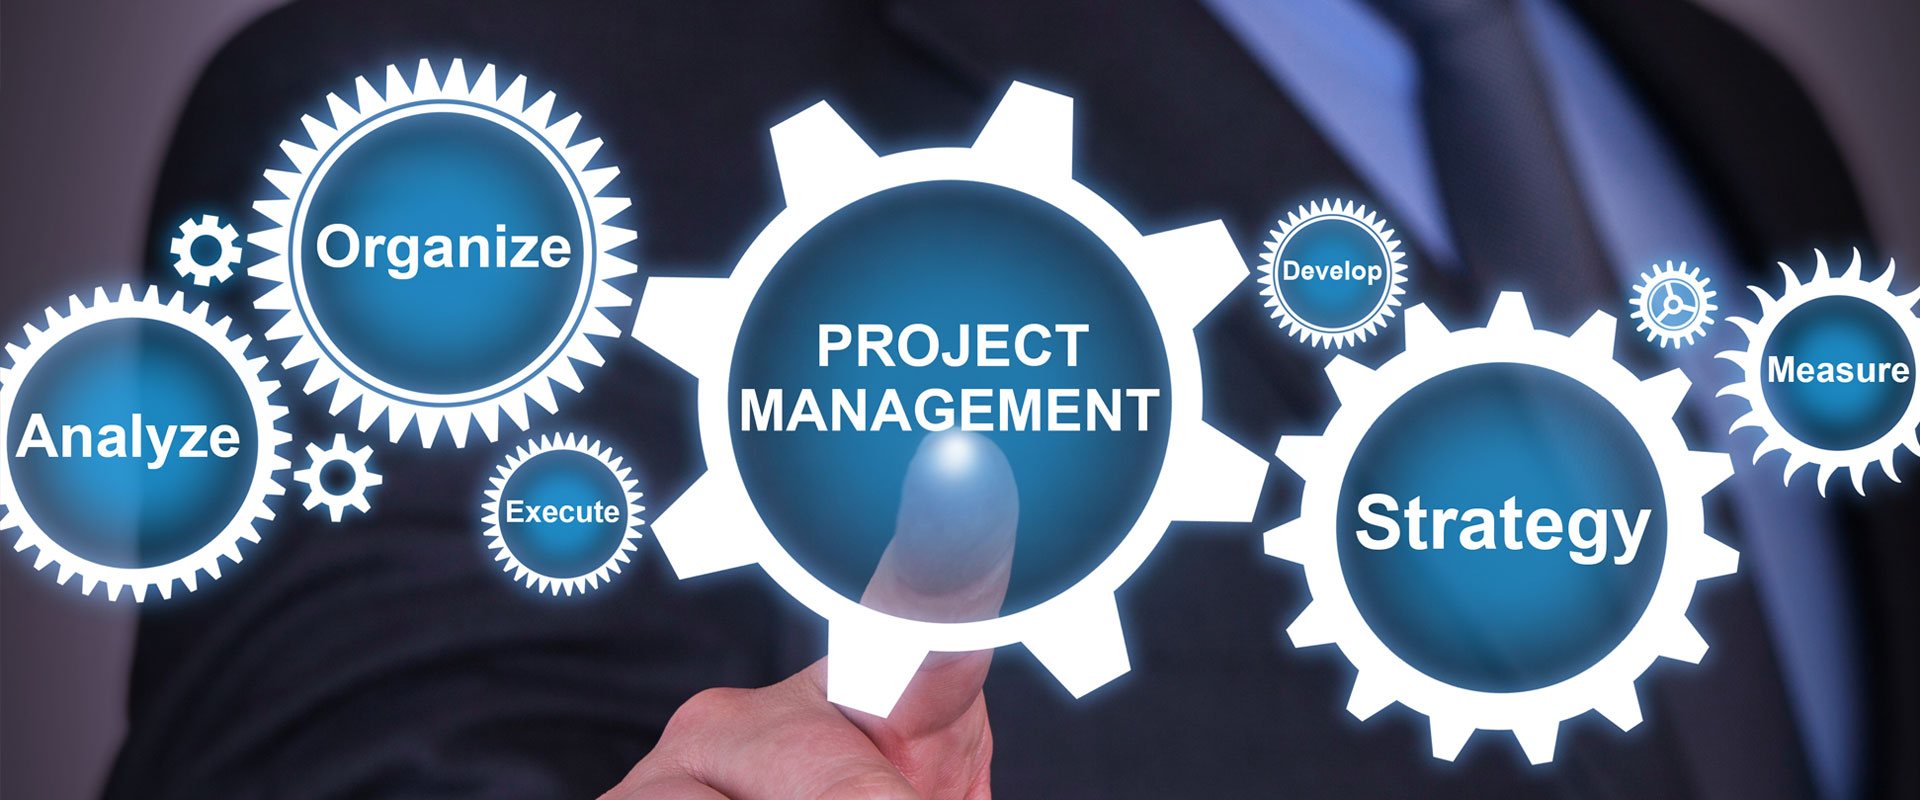 A gear labeled "Project Management". For support REW Computing offers services in project management, as well as eDiscovery and IBM Lotus Notes support for Newmarket, Toronto, the GTA, and Ontario, Canada.